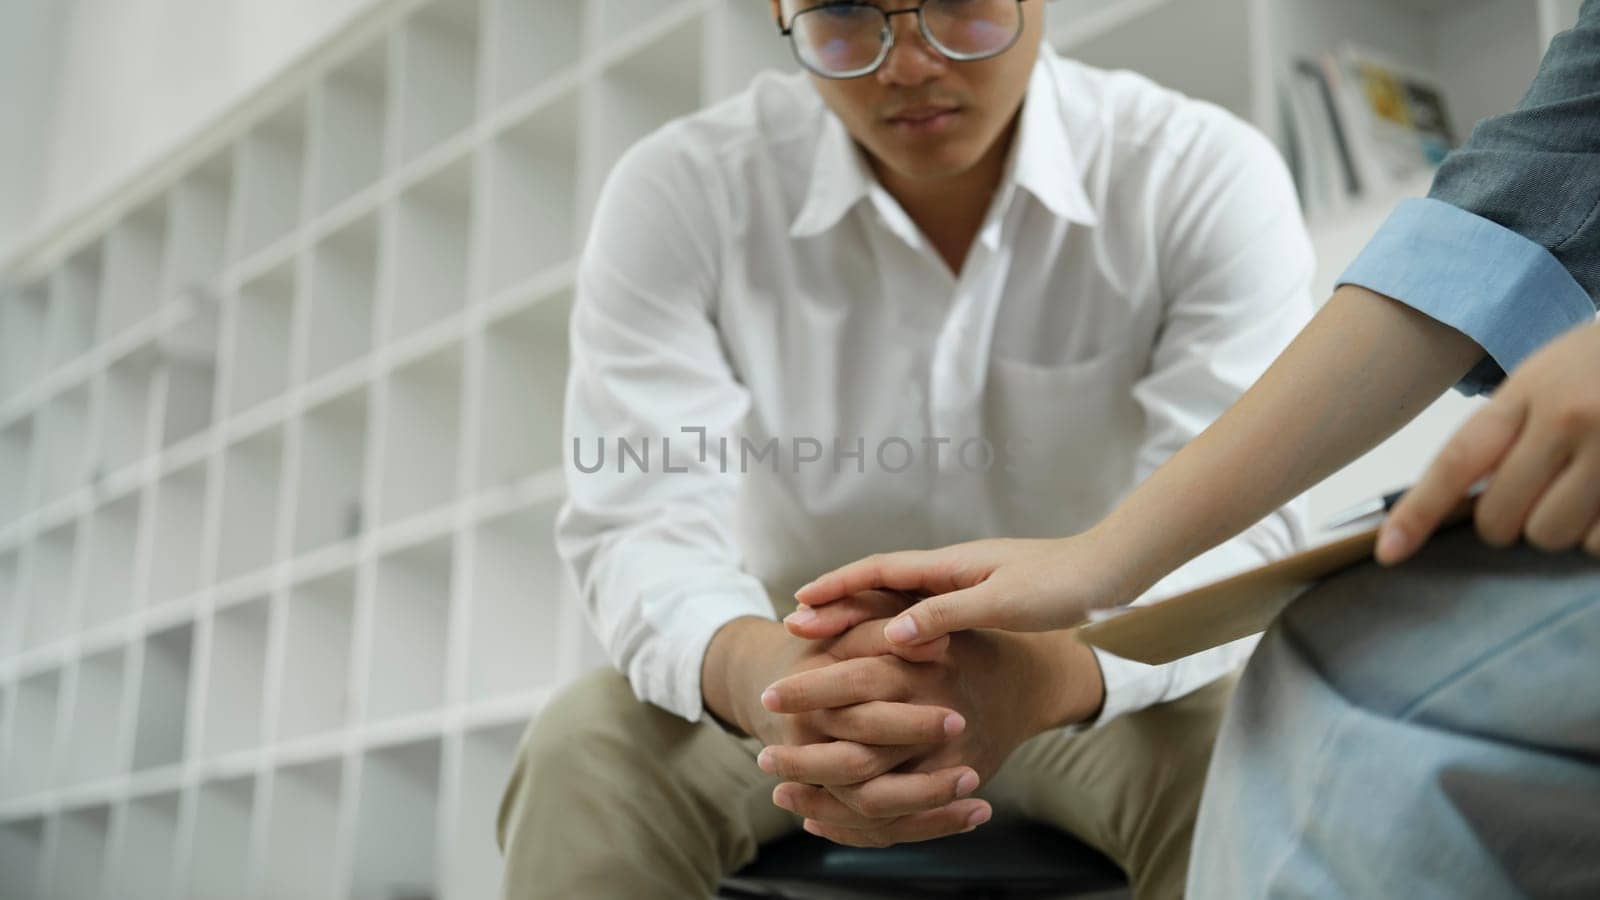 Psychiatrist or counselor holding the patient's hand to comfort and encourage. Young Asian female psychologist keeping hand of wrist of male patient sitting in front of her and sharing his problems.